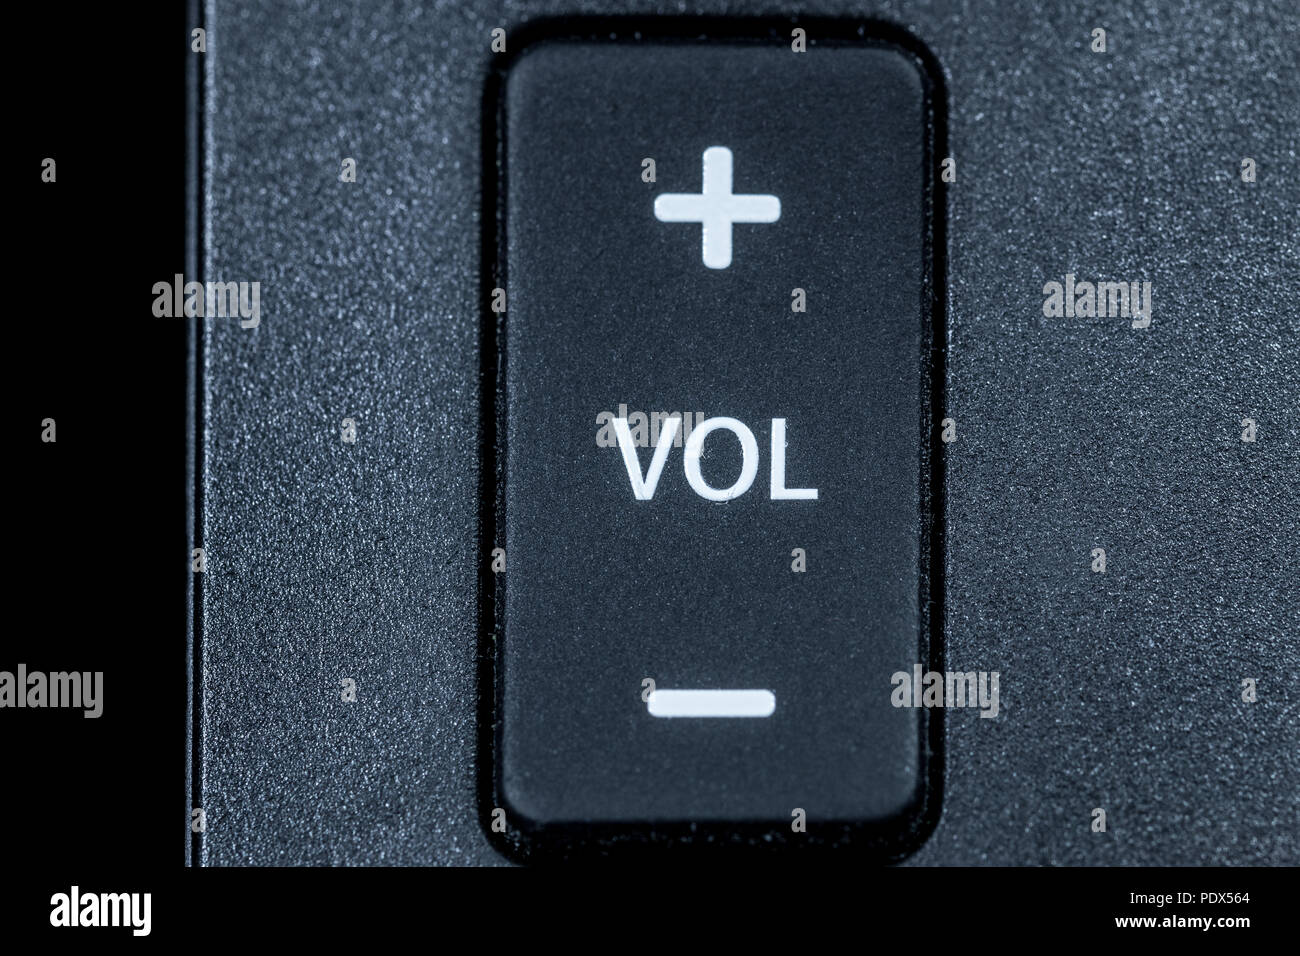 Volume switch on a remote control Stock Photo